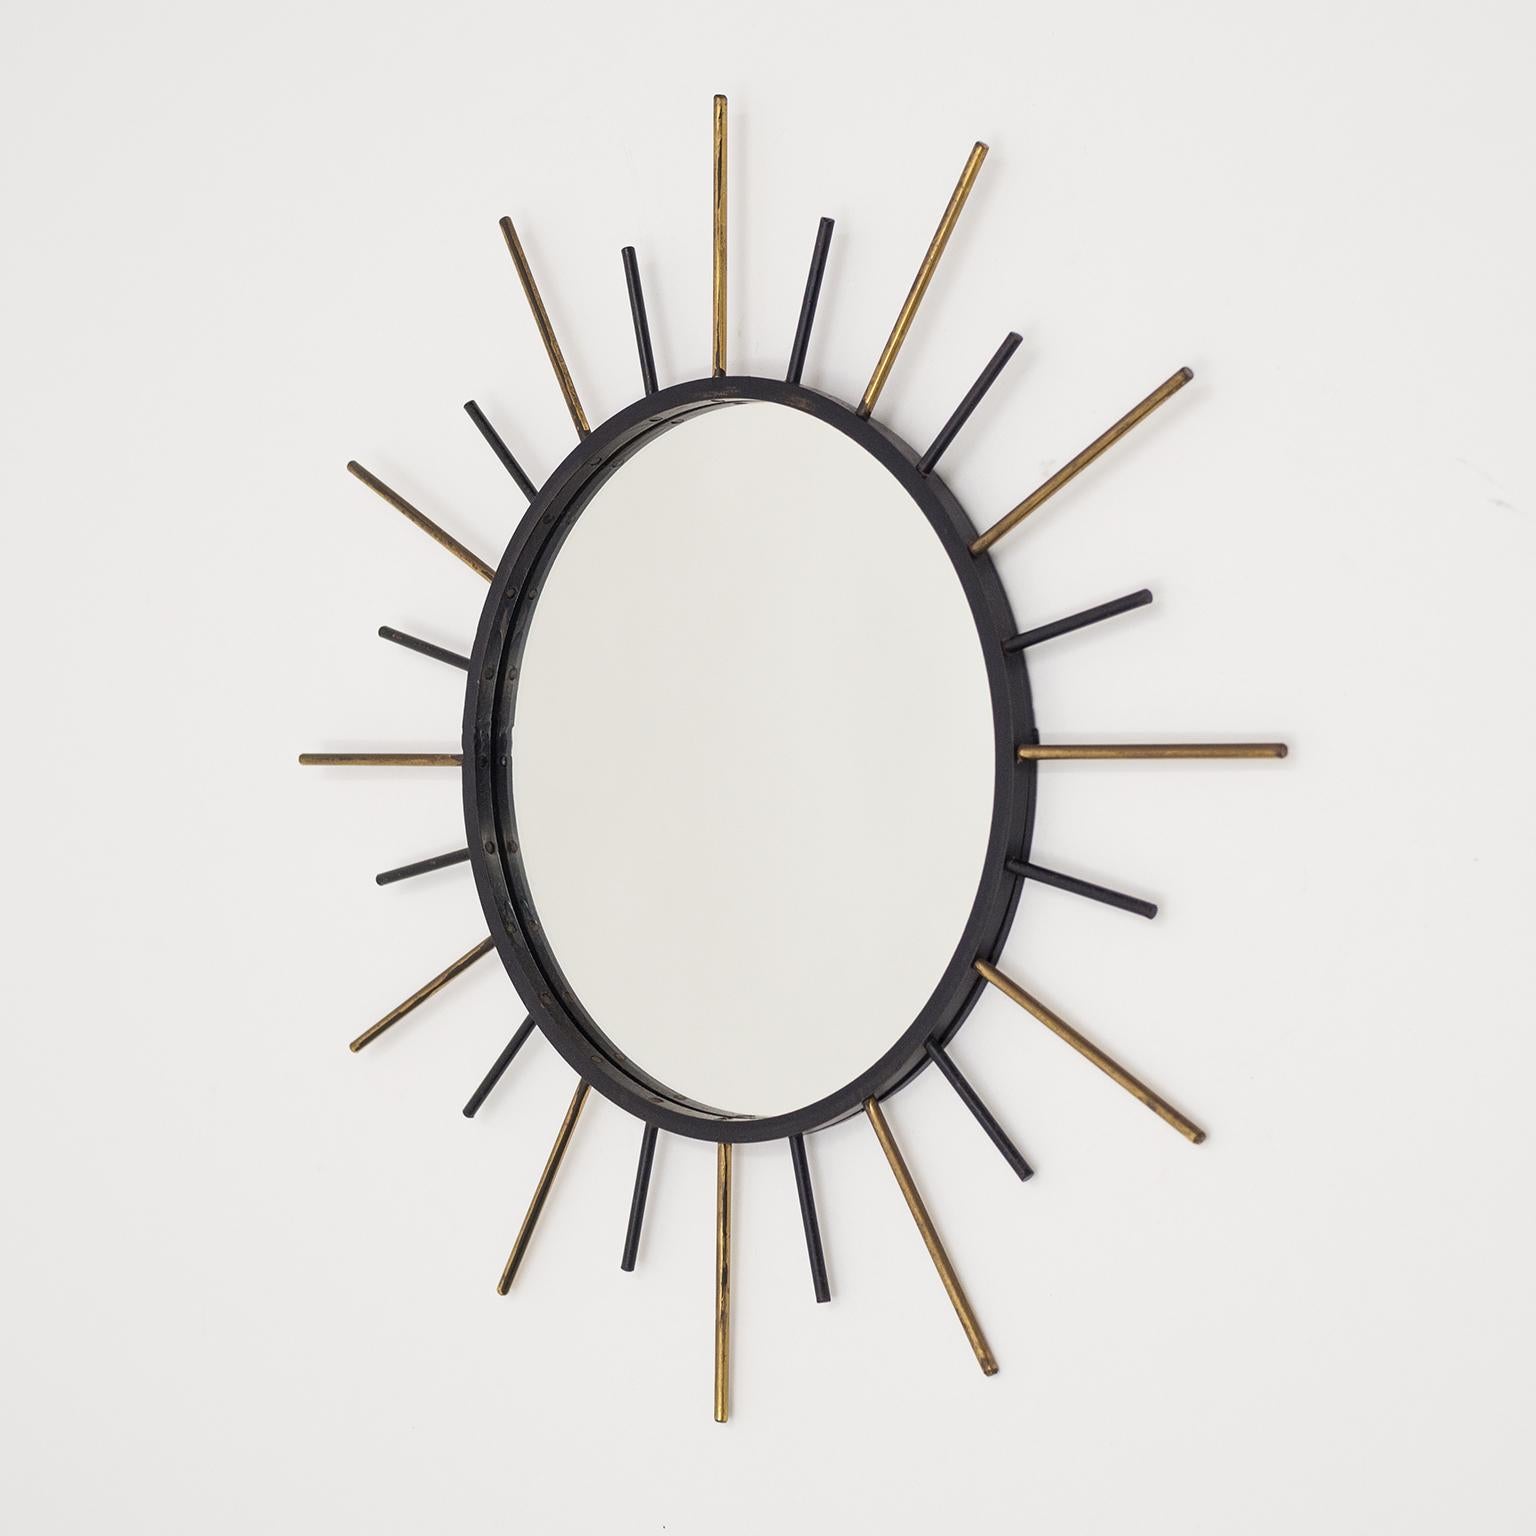 French modernist sunburst mirror from the 1950s with a blackend steel frame and alternating brass an steel rays. Good original condition with patina on the brass and some light loss of paint.